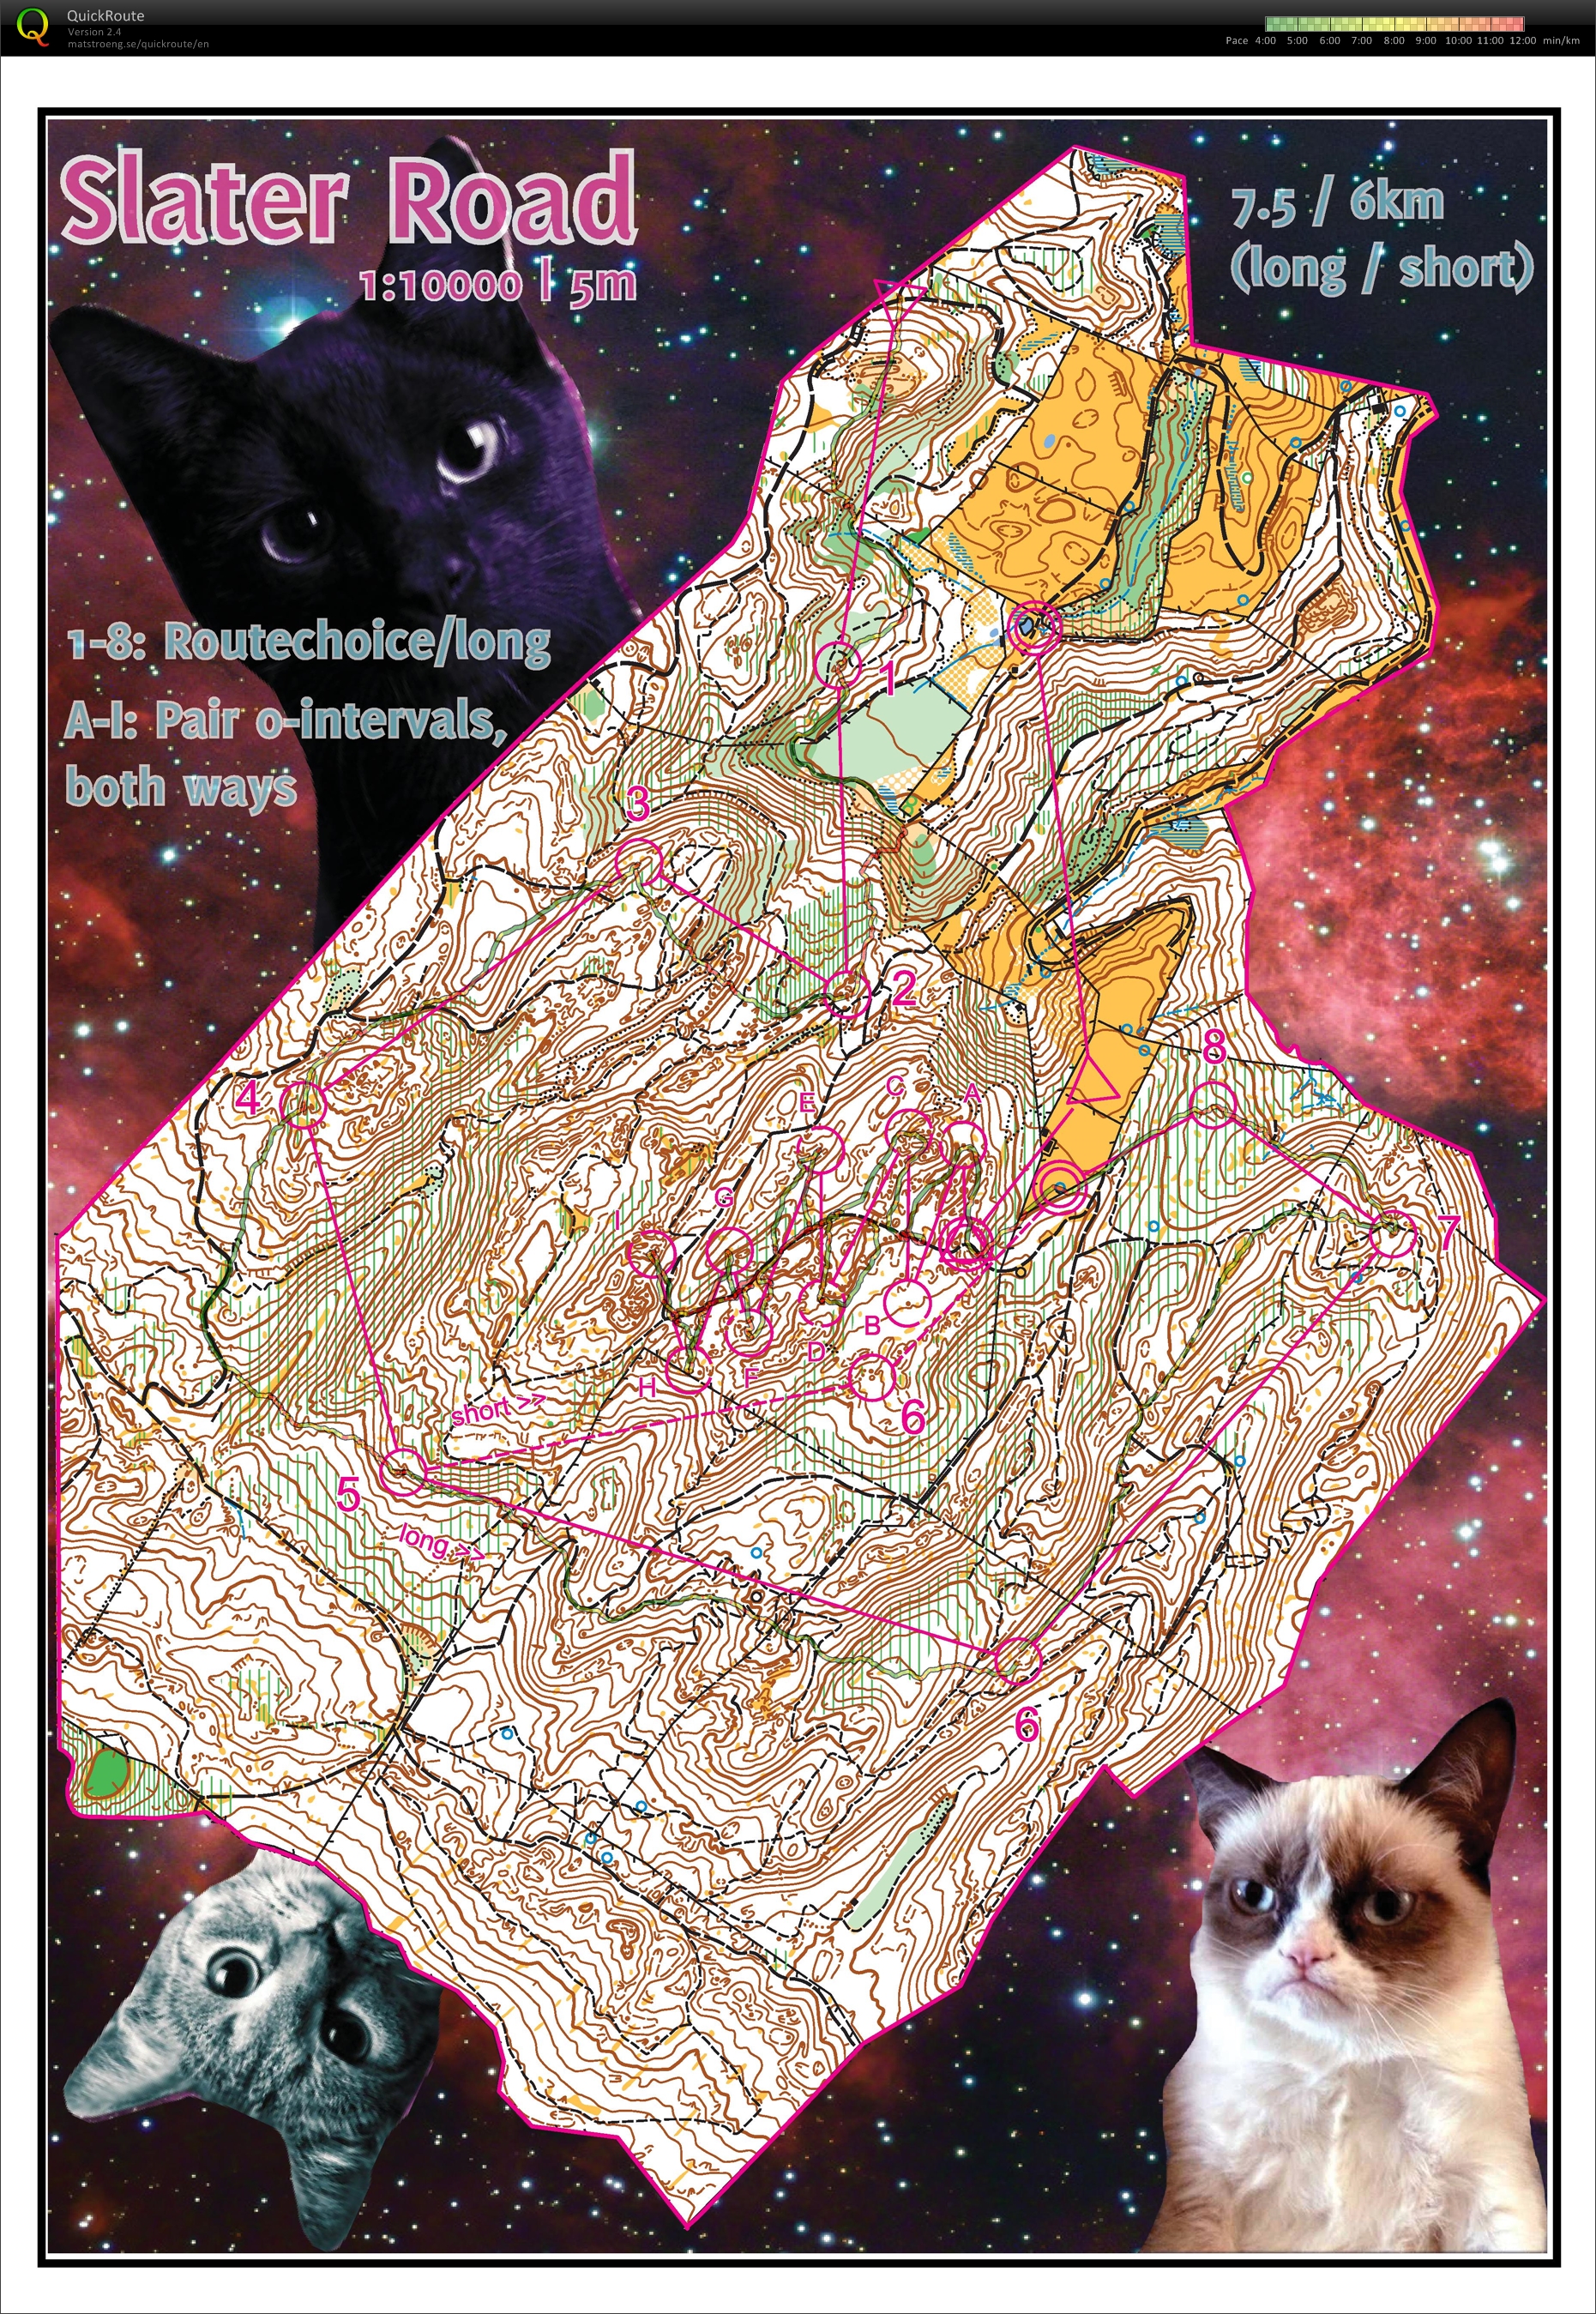 Space Cats (26-04-2014)